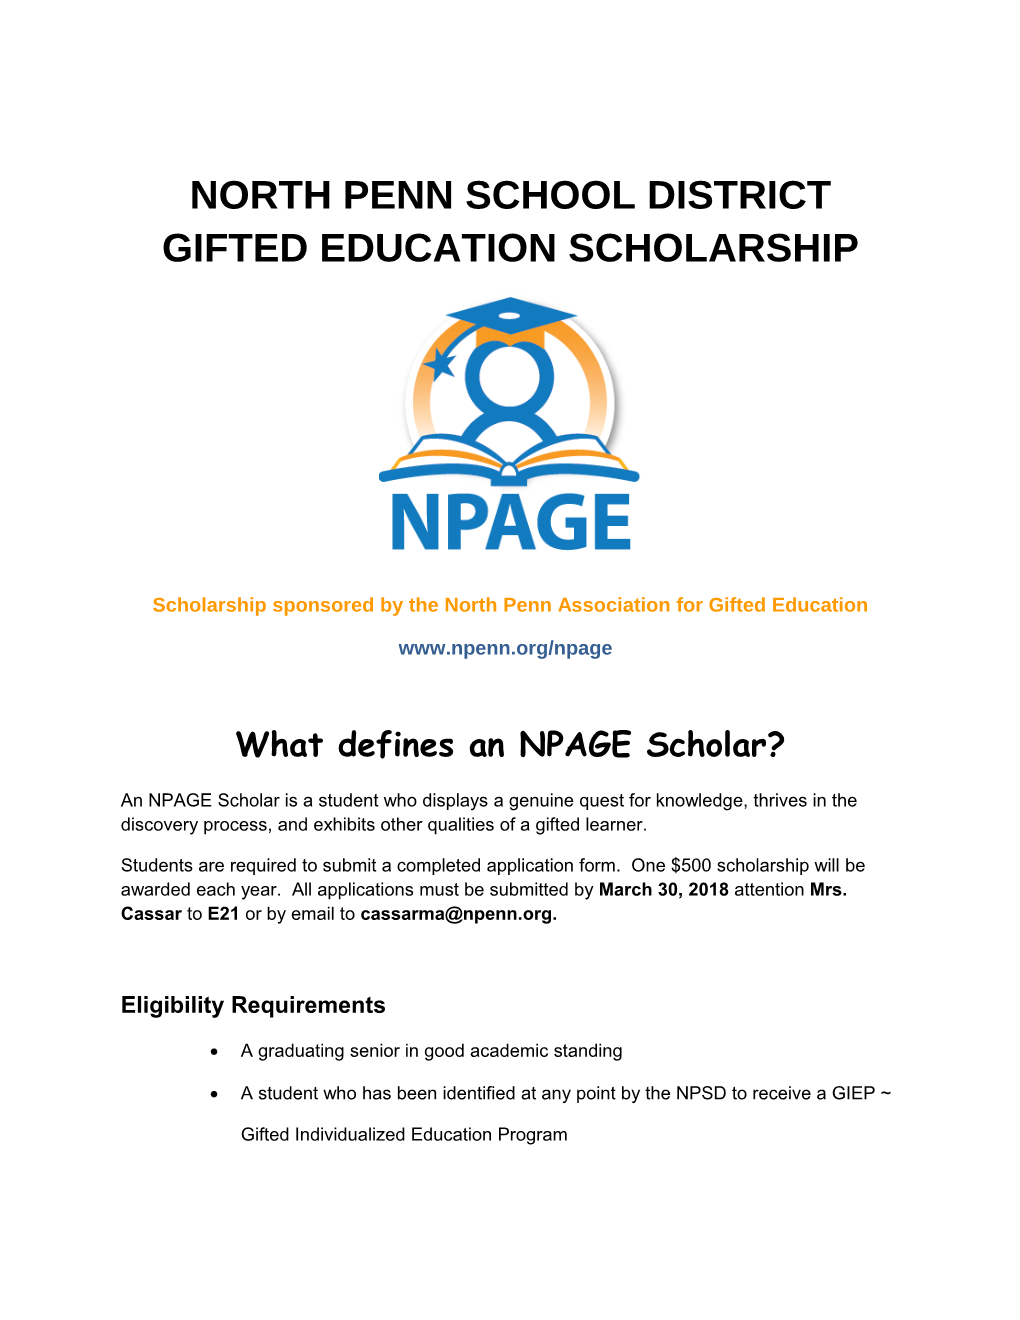 Scholarship Sponsored by the North Penn Association for Gifted Education